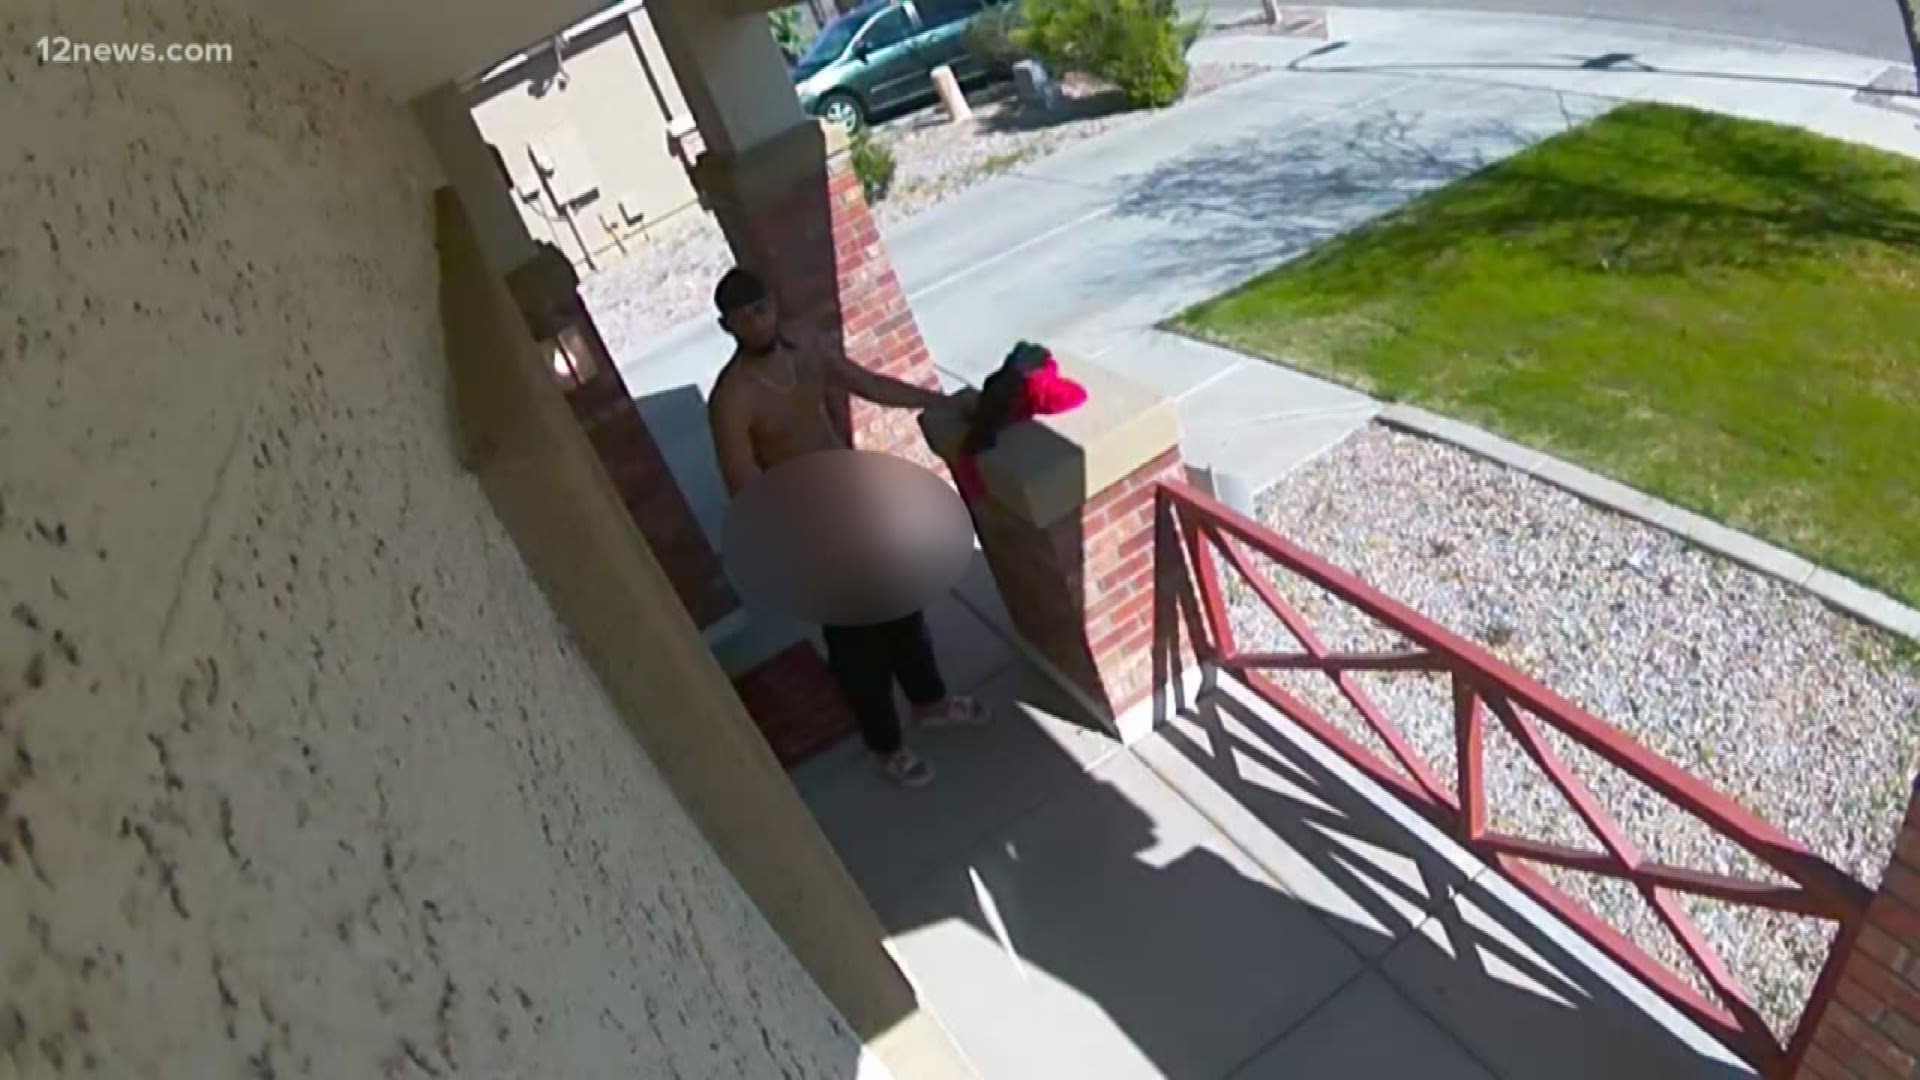 The unidentified suspect chose a Laveen neighborhood porch to pleasure himself.